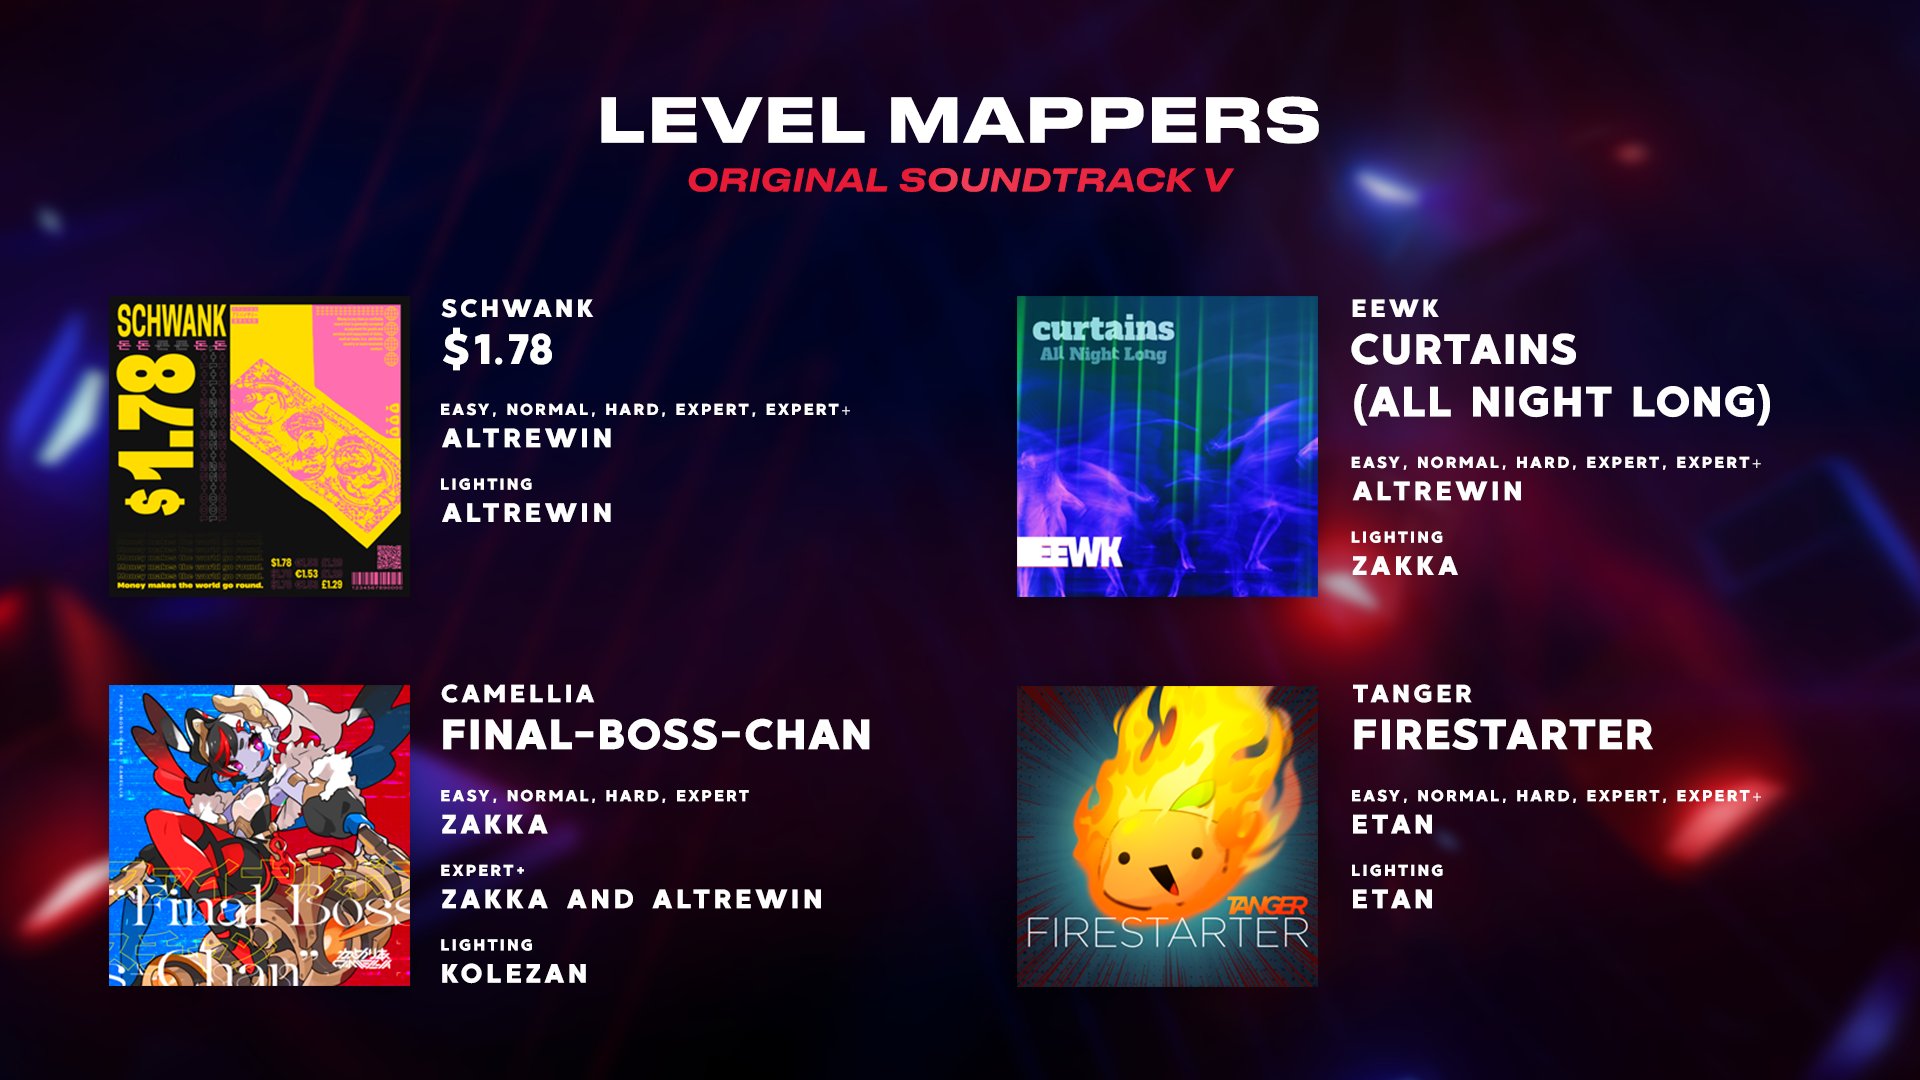 Beat Saber on "OST 5 mappers for each level! ⬇️ Which beatmap or pattern is your favorite? https://t.co/Dt7mQrtAWj" / Twitter